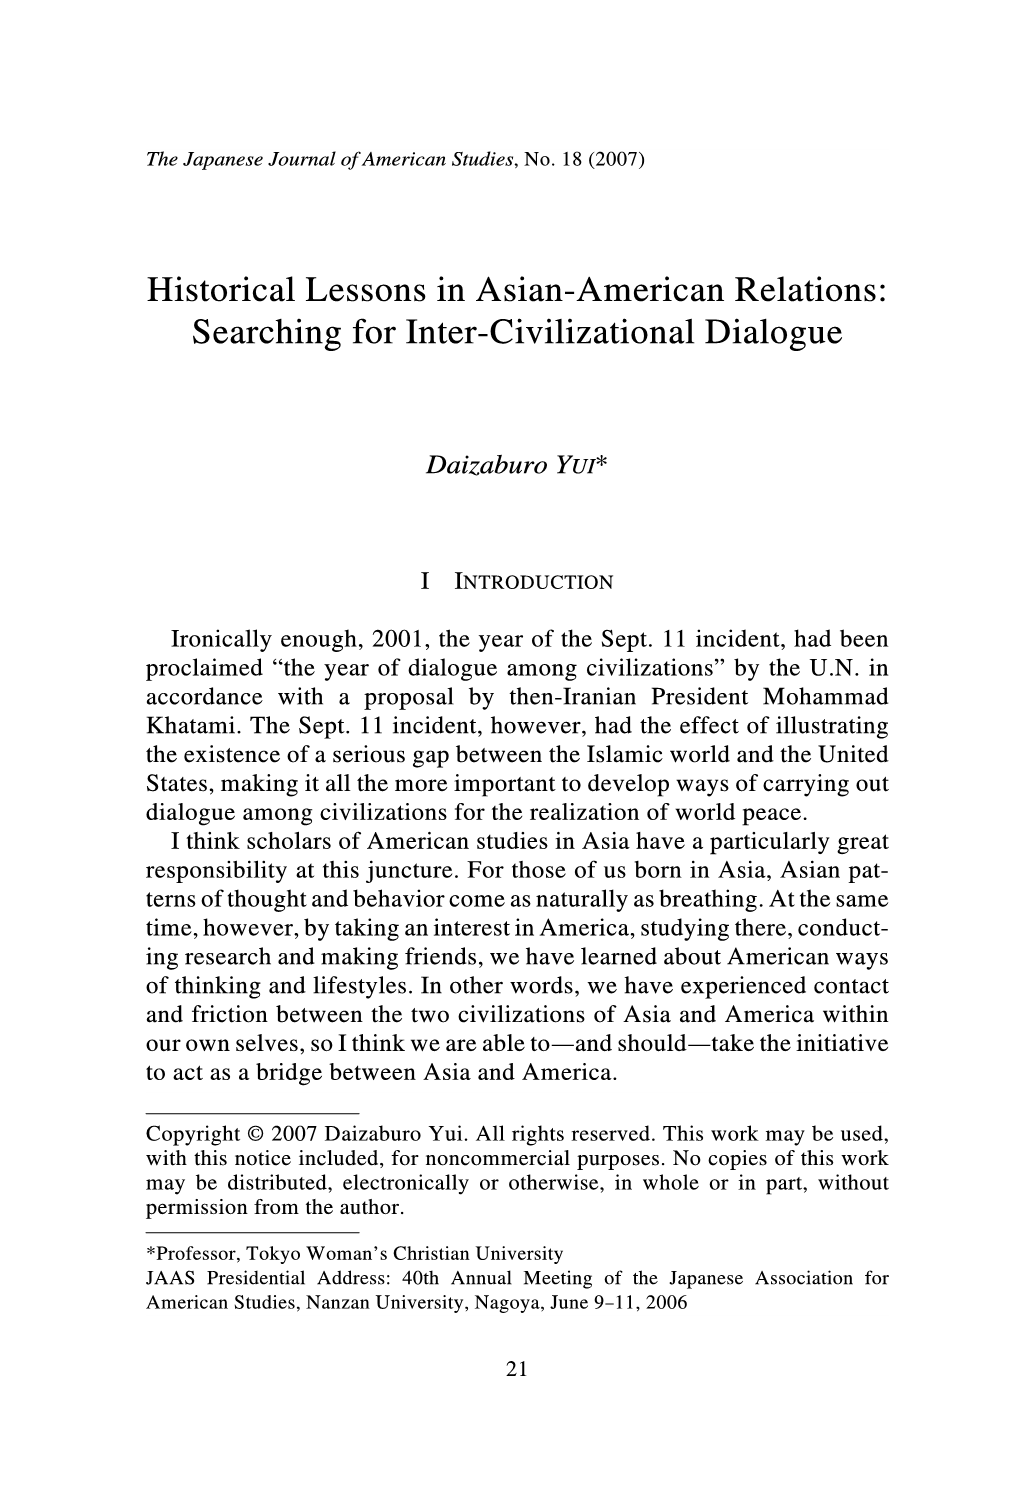 Historical Lessons in Asian-American Relations: Searching for Inter-Civilizational Dialogue